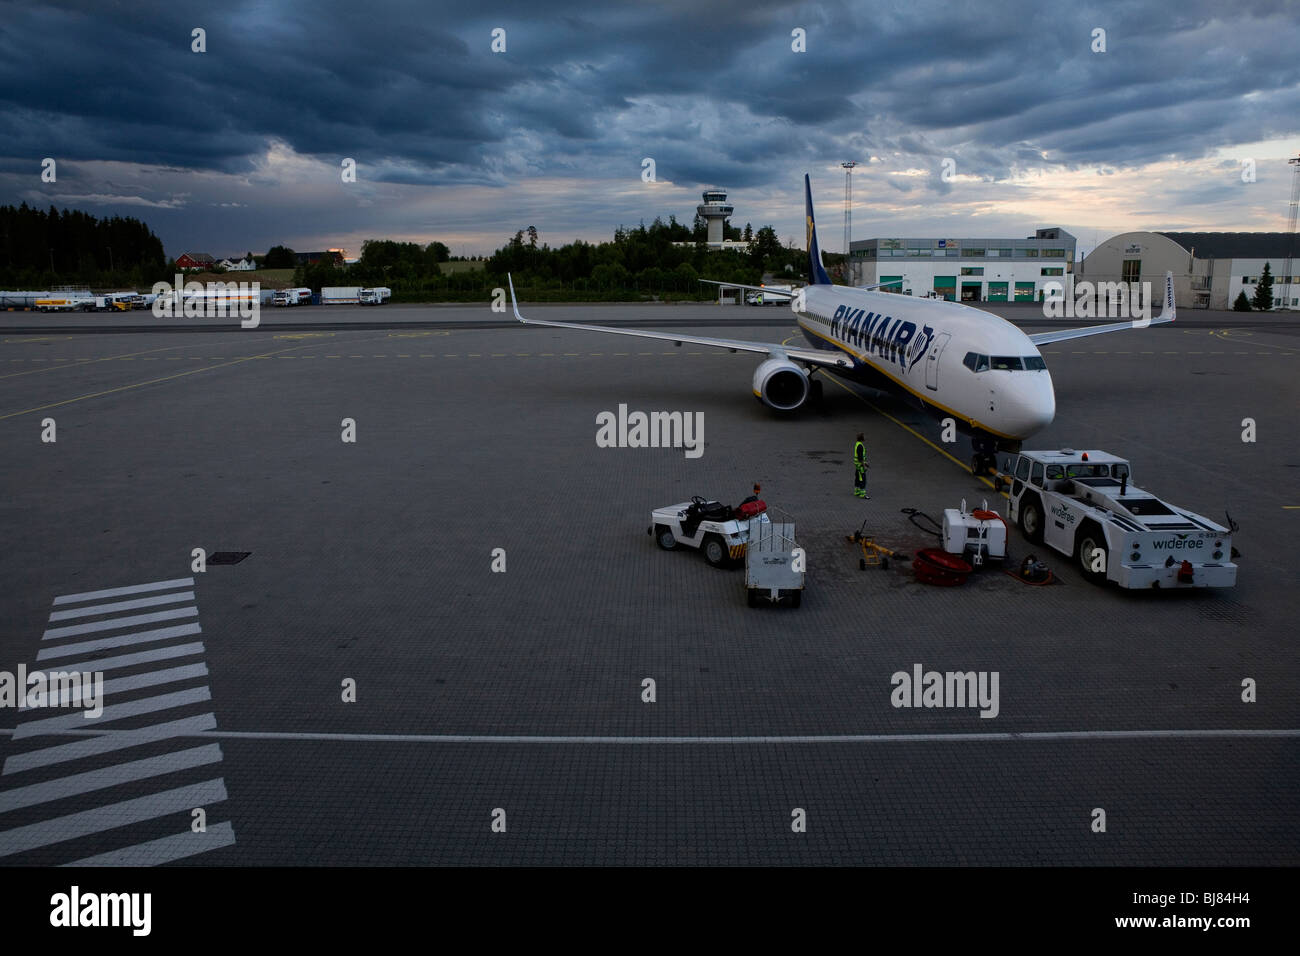 A ryanair aeroplane parked at an airport in evening light under threathening clouds Stock Photo